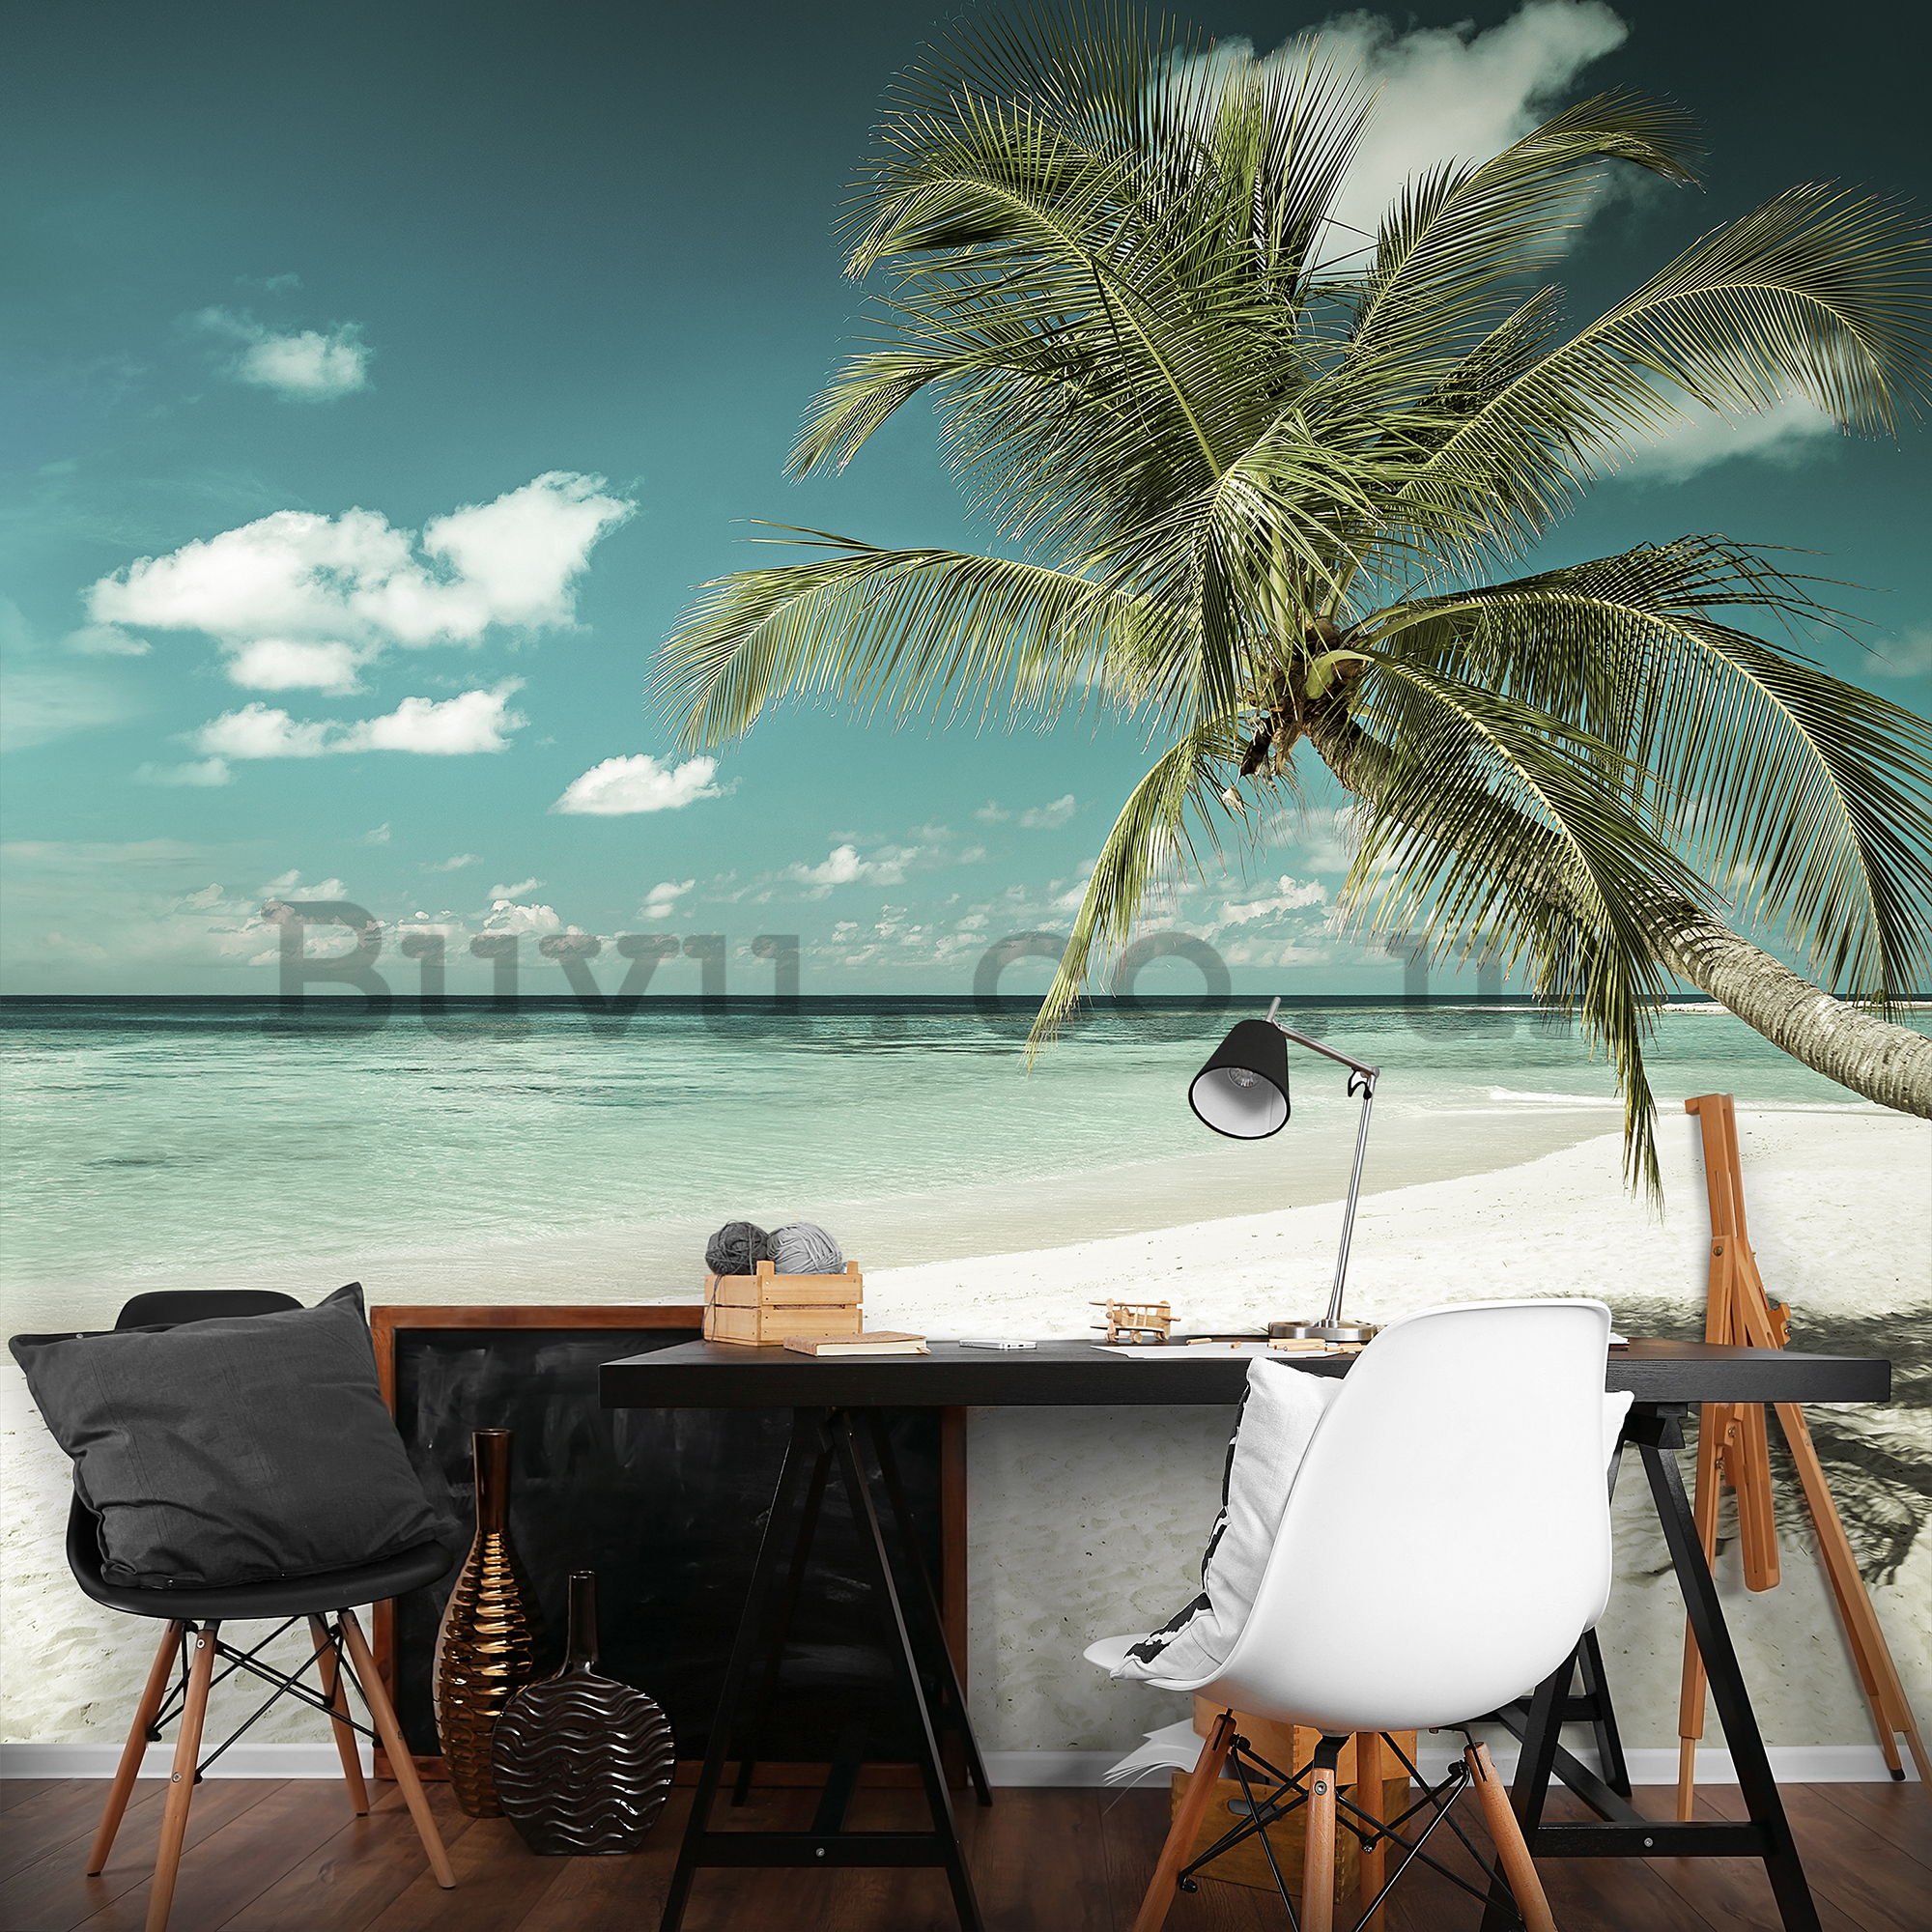 Wall mural: Palm tree over the sea - 184x254 cm